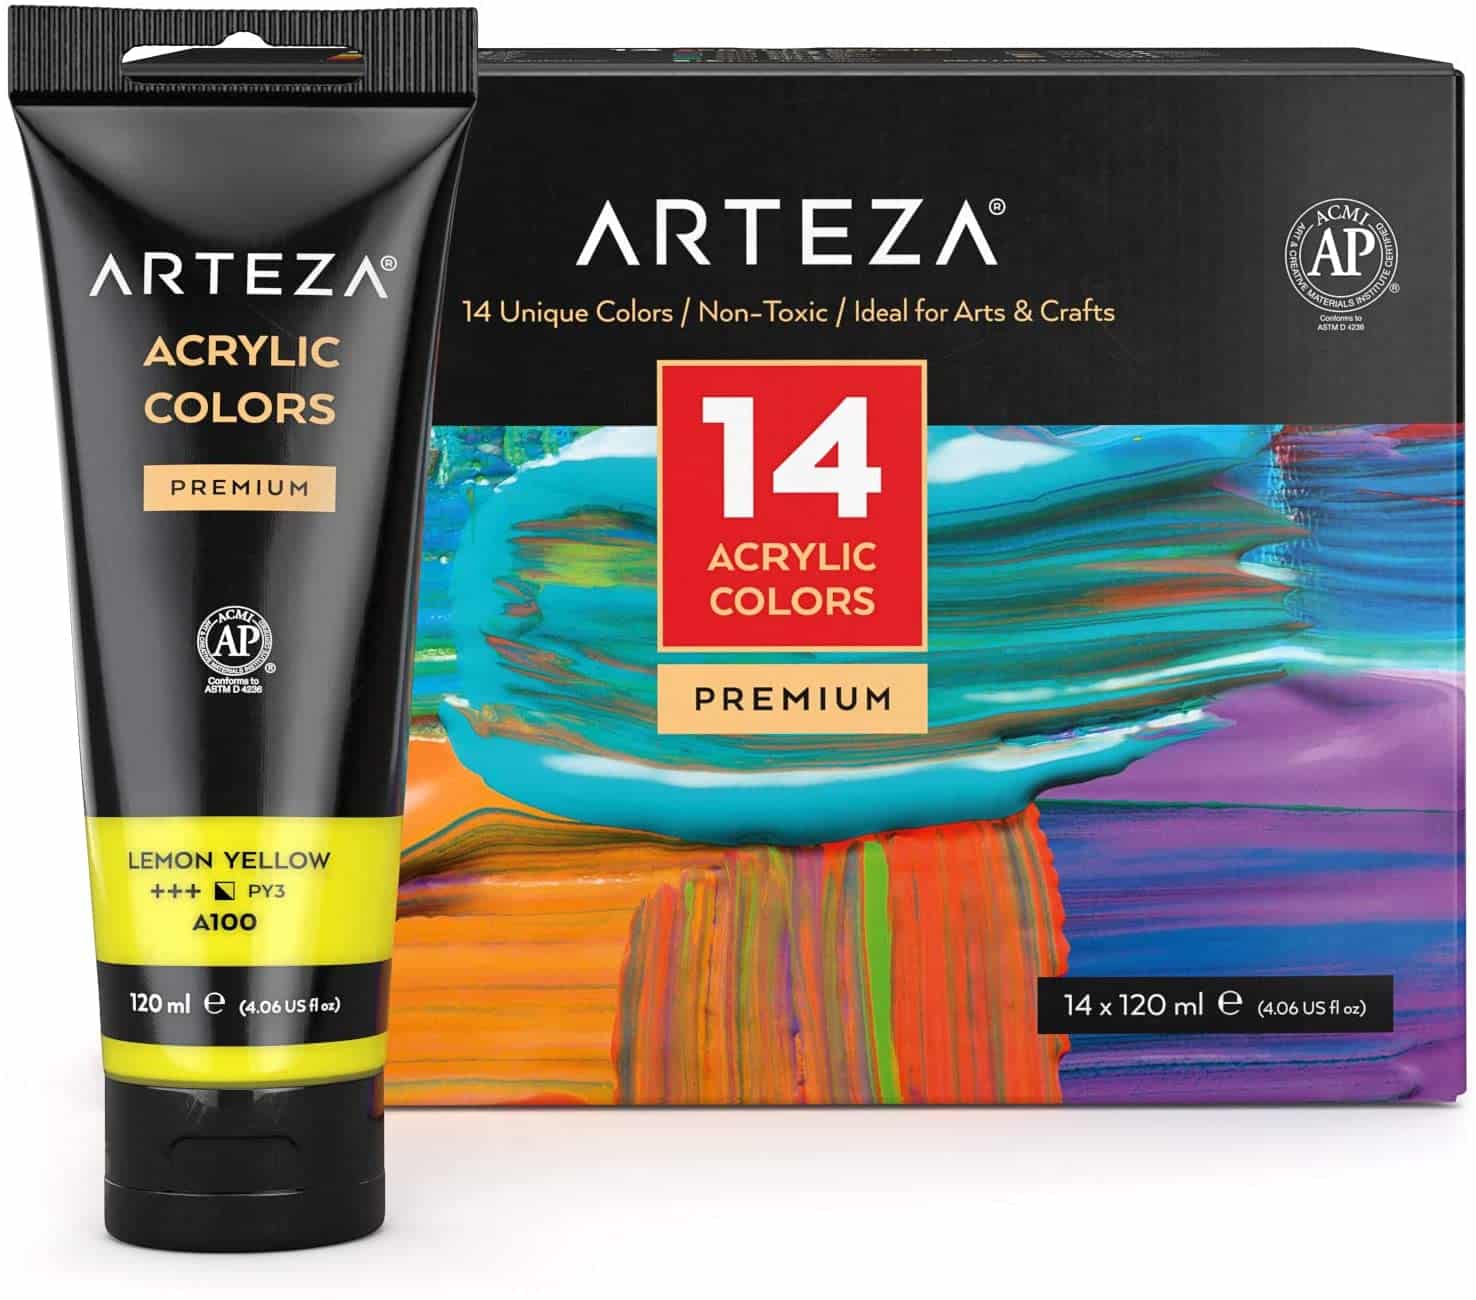  ARTEZA Acrylic Paint Markers, Pack of 3, A700 Gold, 2